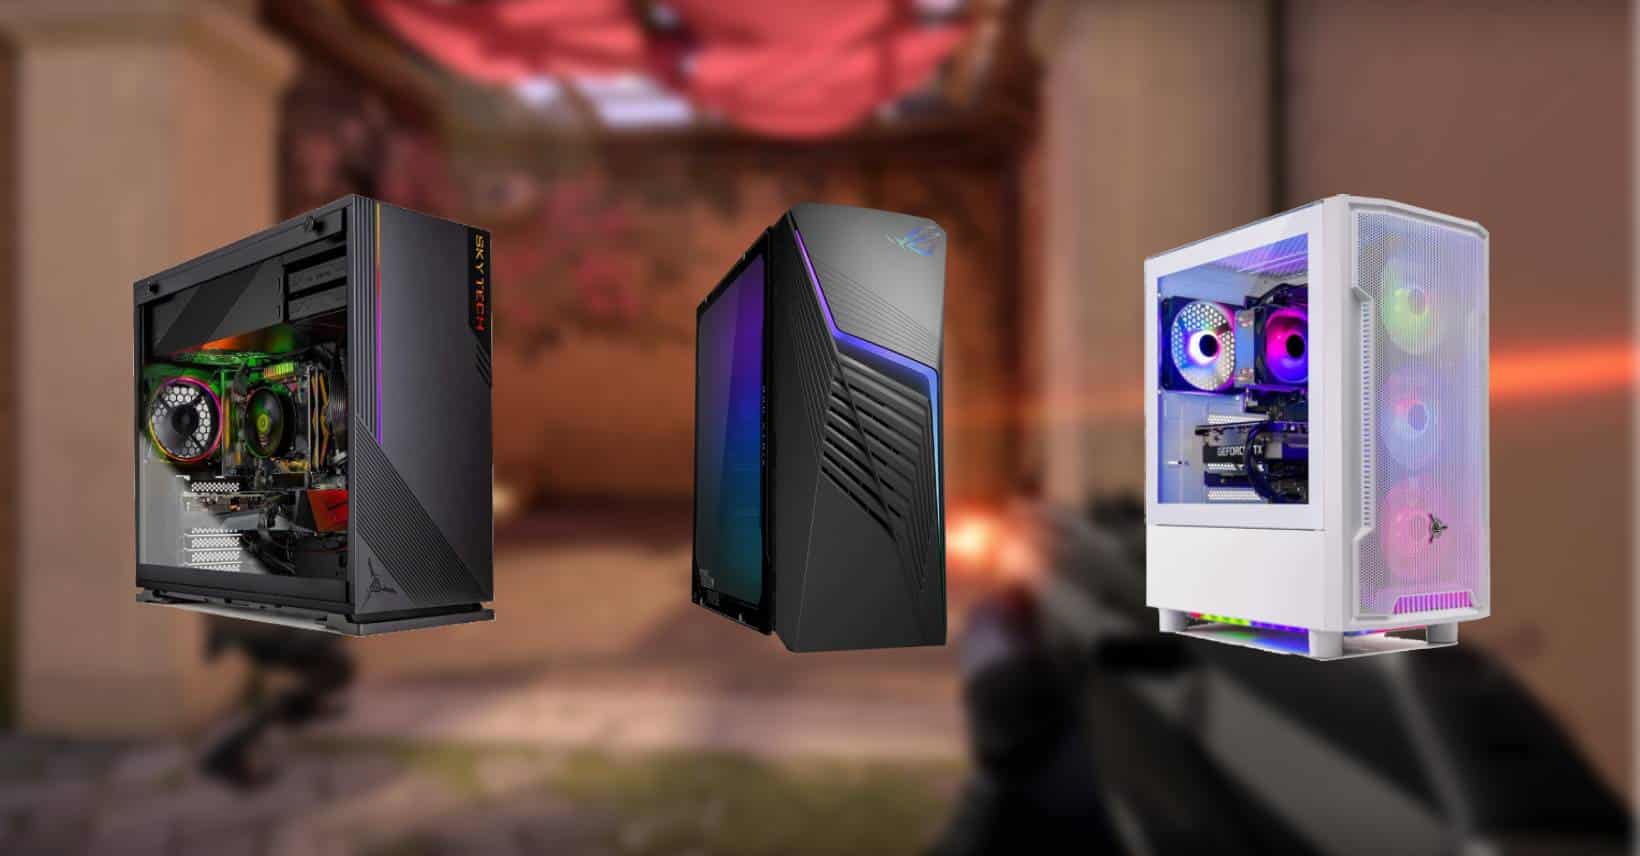 Three different styles of desktop gaming computers with the leftmost one being the best gaming PC for Valorant, having its side panel removed to show the internal components.